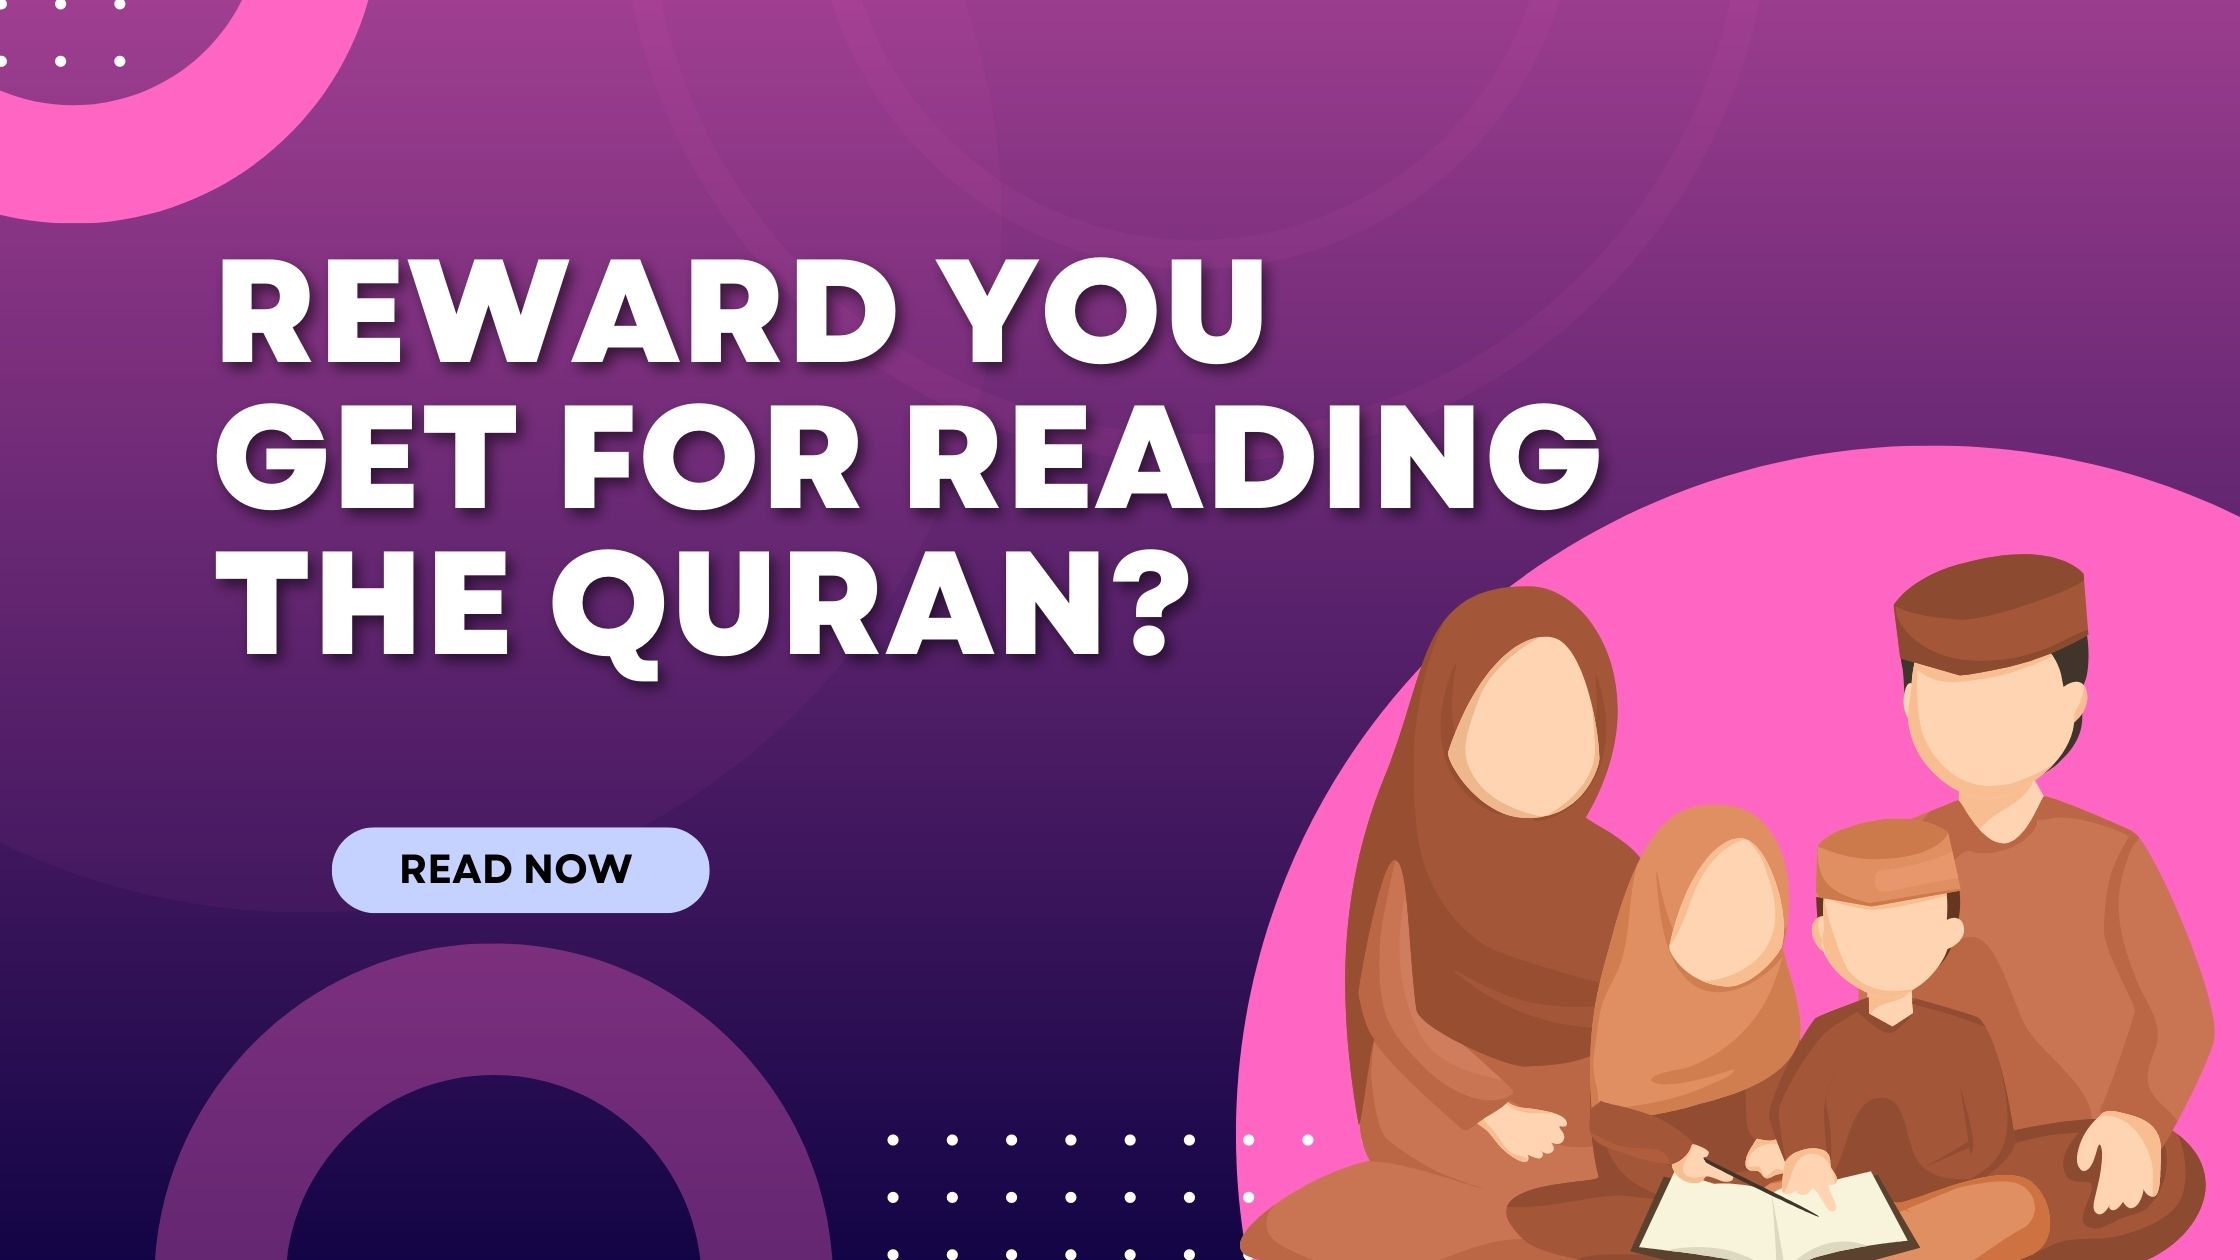 How much reward do you get for reading the Quran